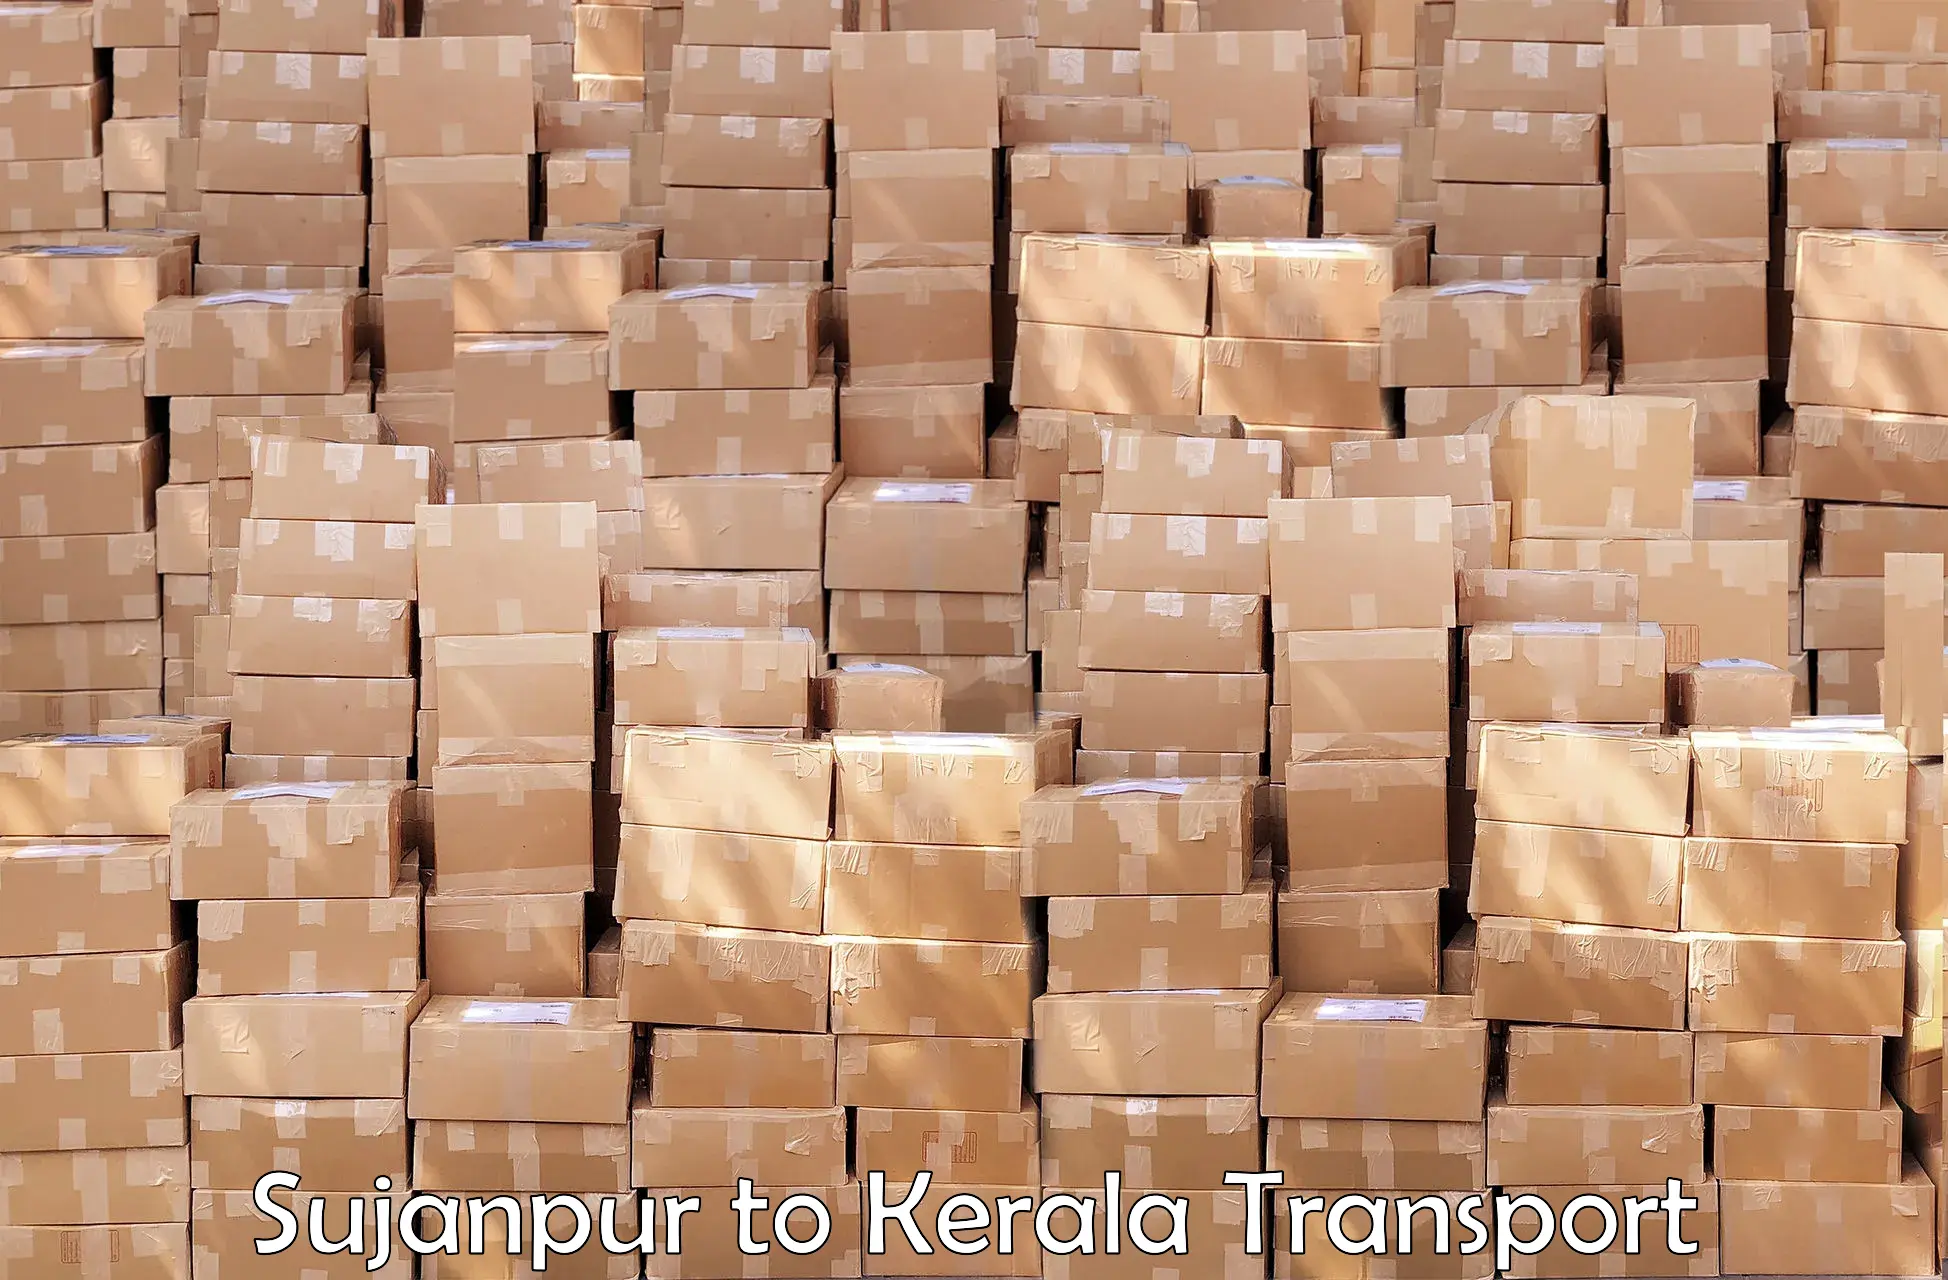 Transport in sharing in Sujanpur to Trivandrum